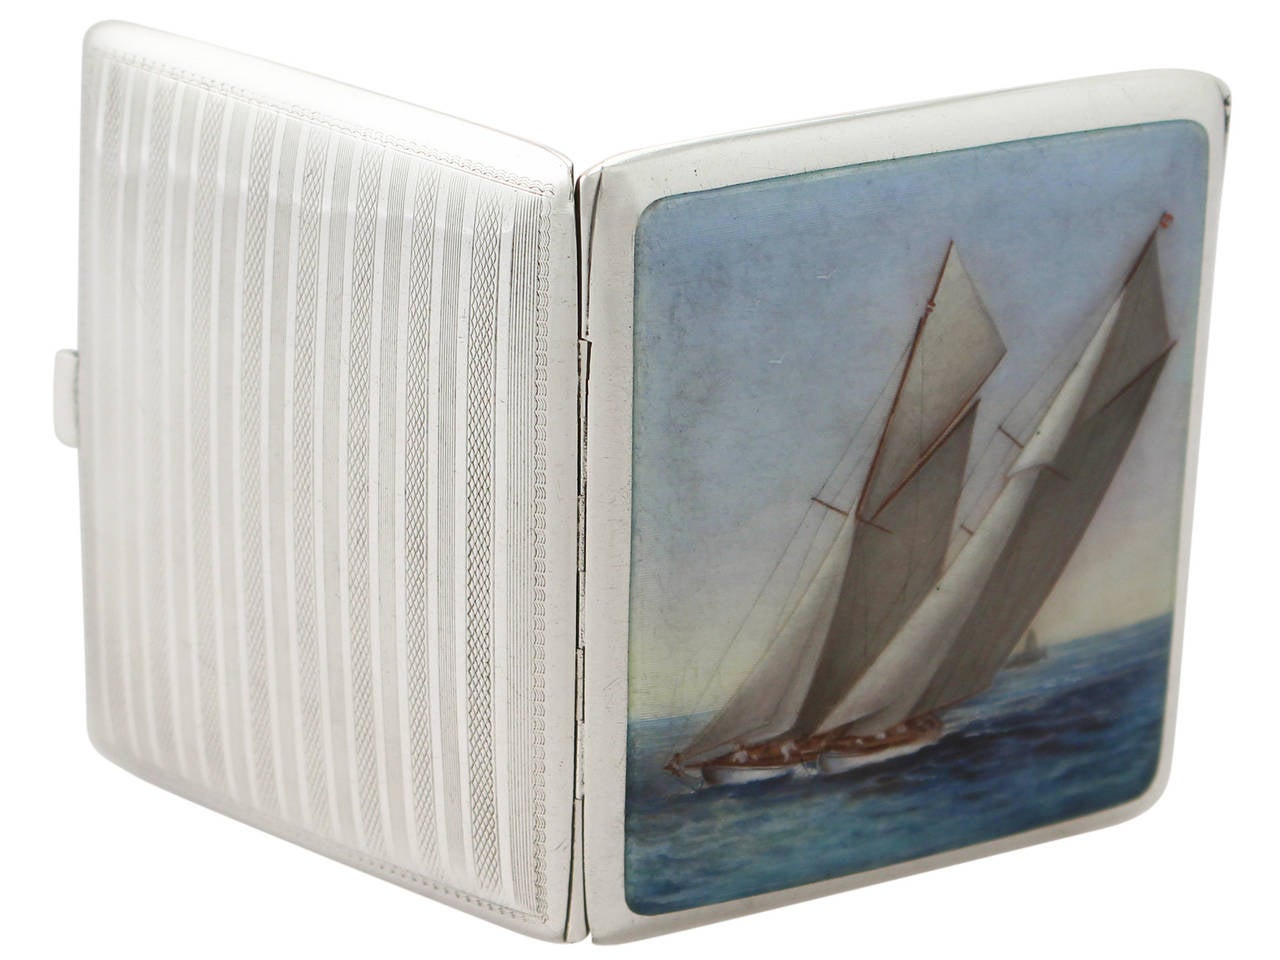 Early 20th Century Austrian Silver and Enamel Cigarette Case With Nautical Interest - Antique